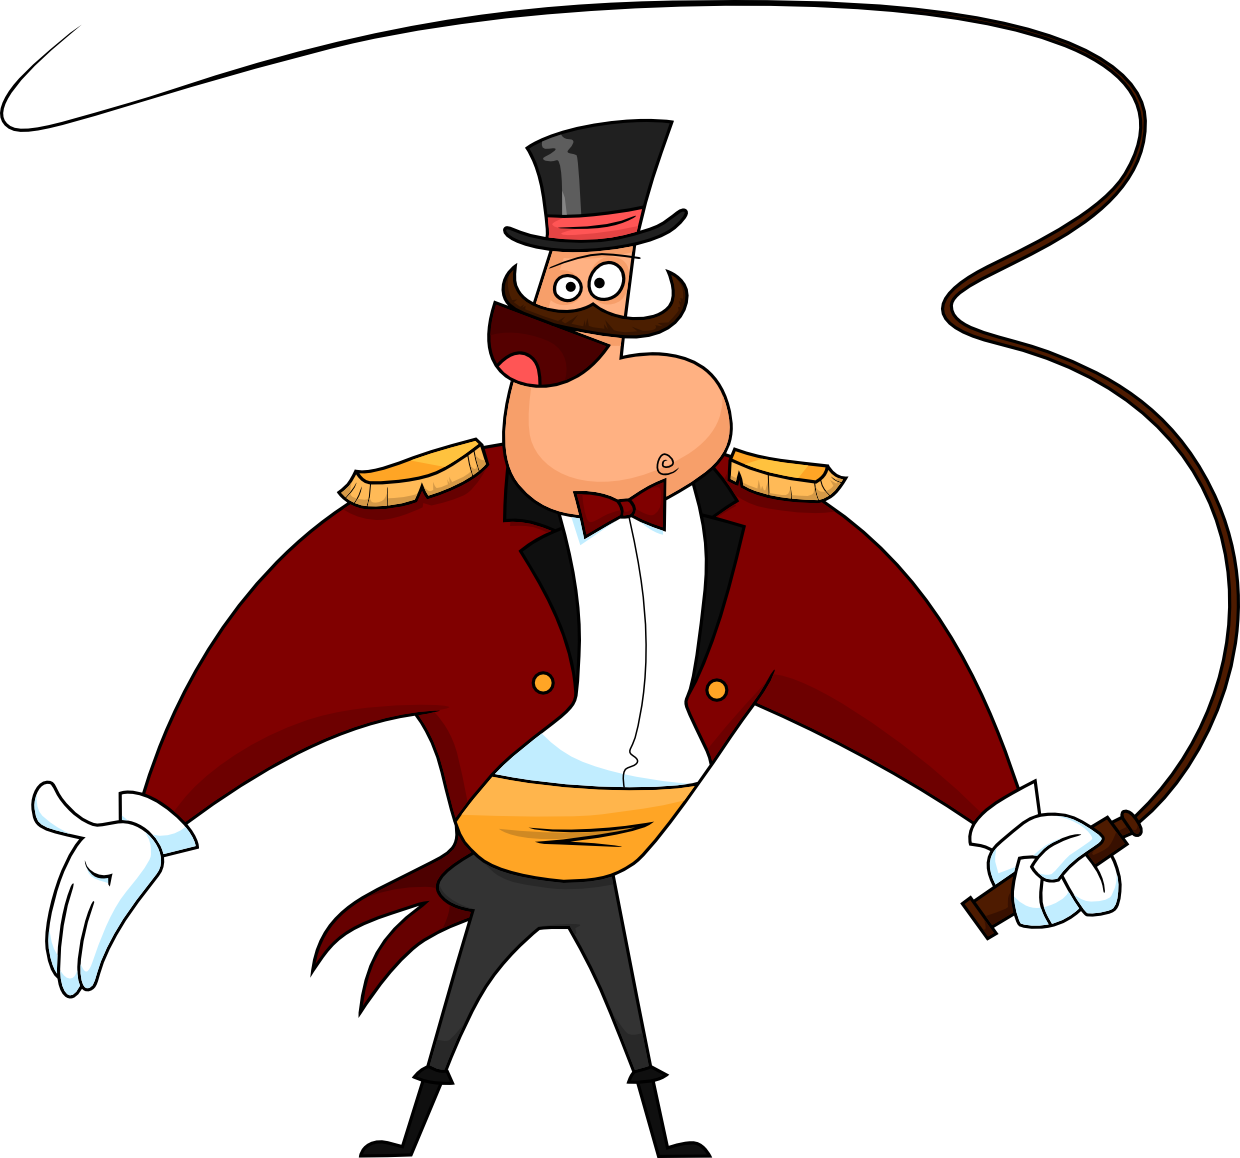 It Should Be A Really Fun "circus" Theme For The Month - Cartoon Circus Ring Leader (1240x1158)